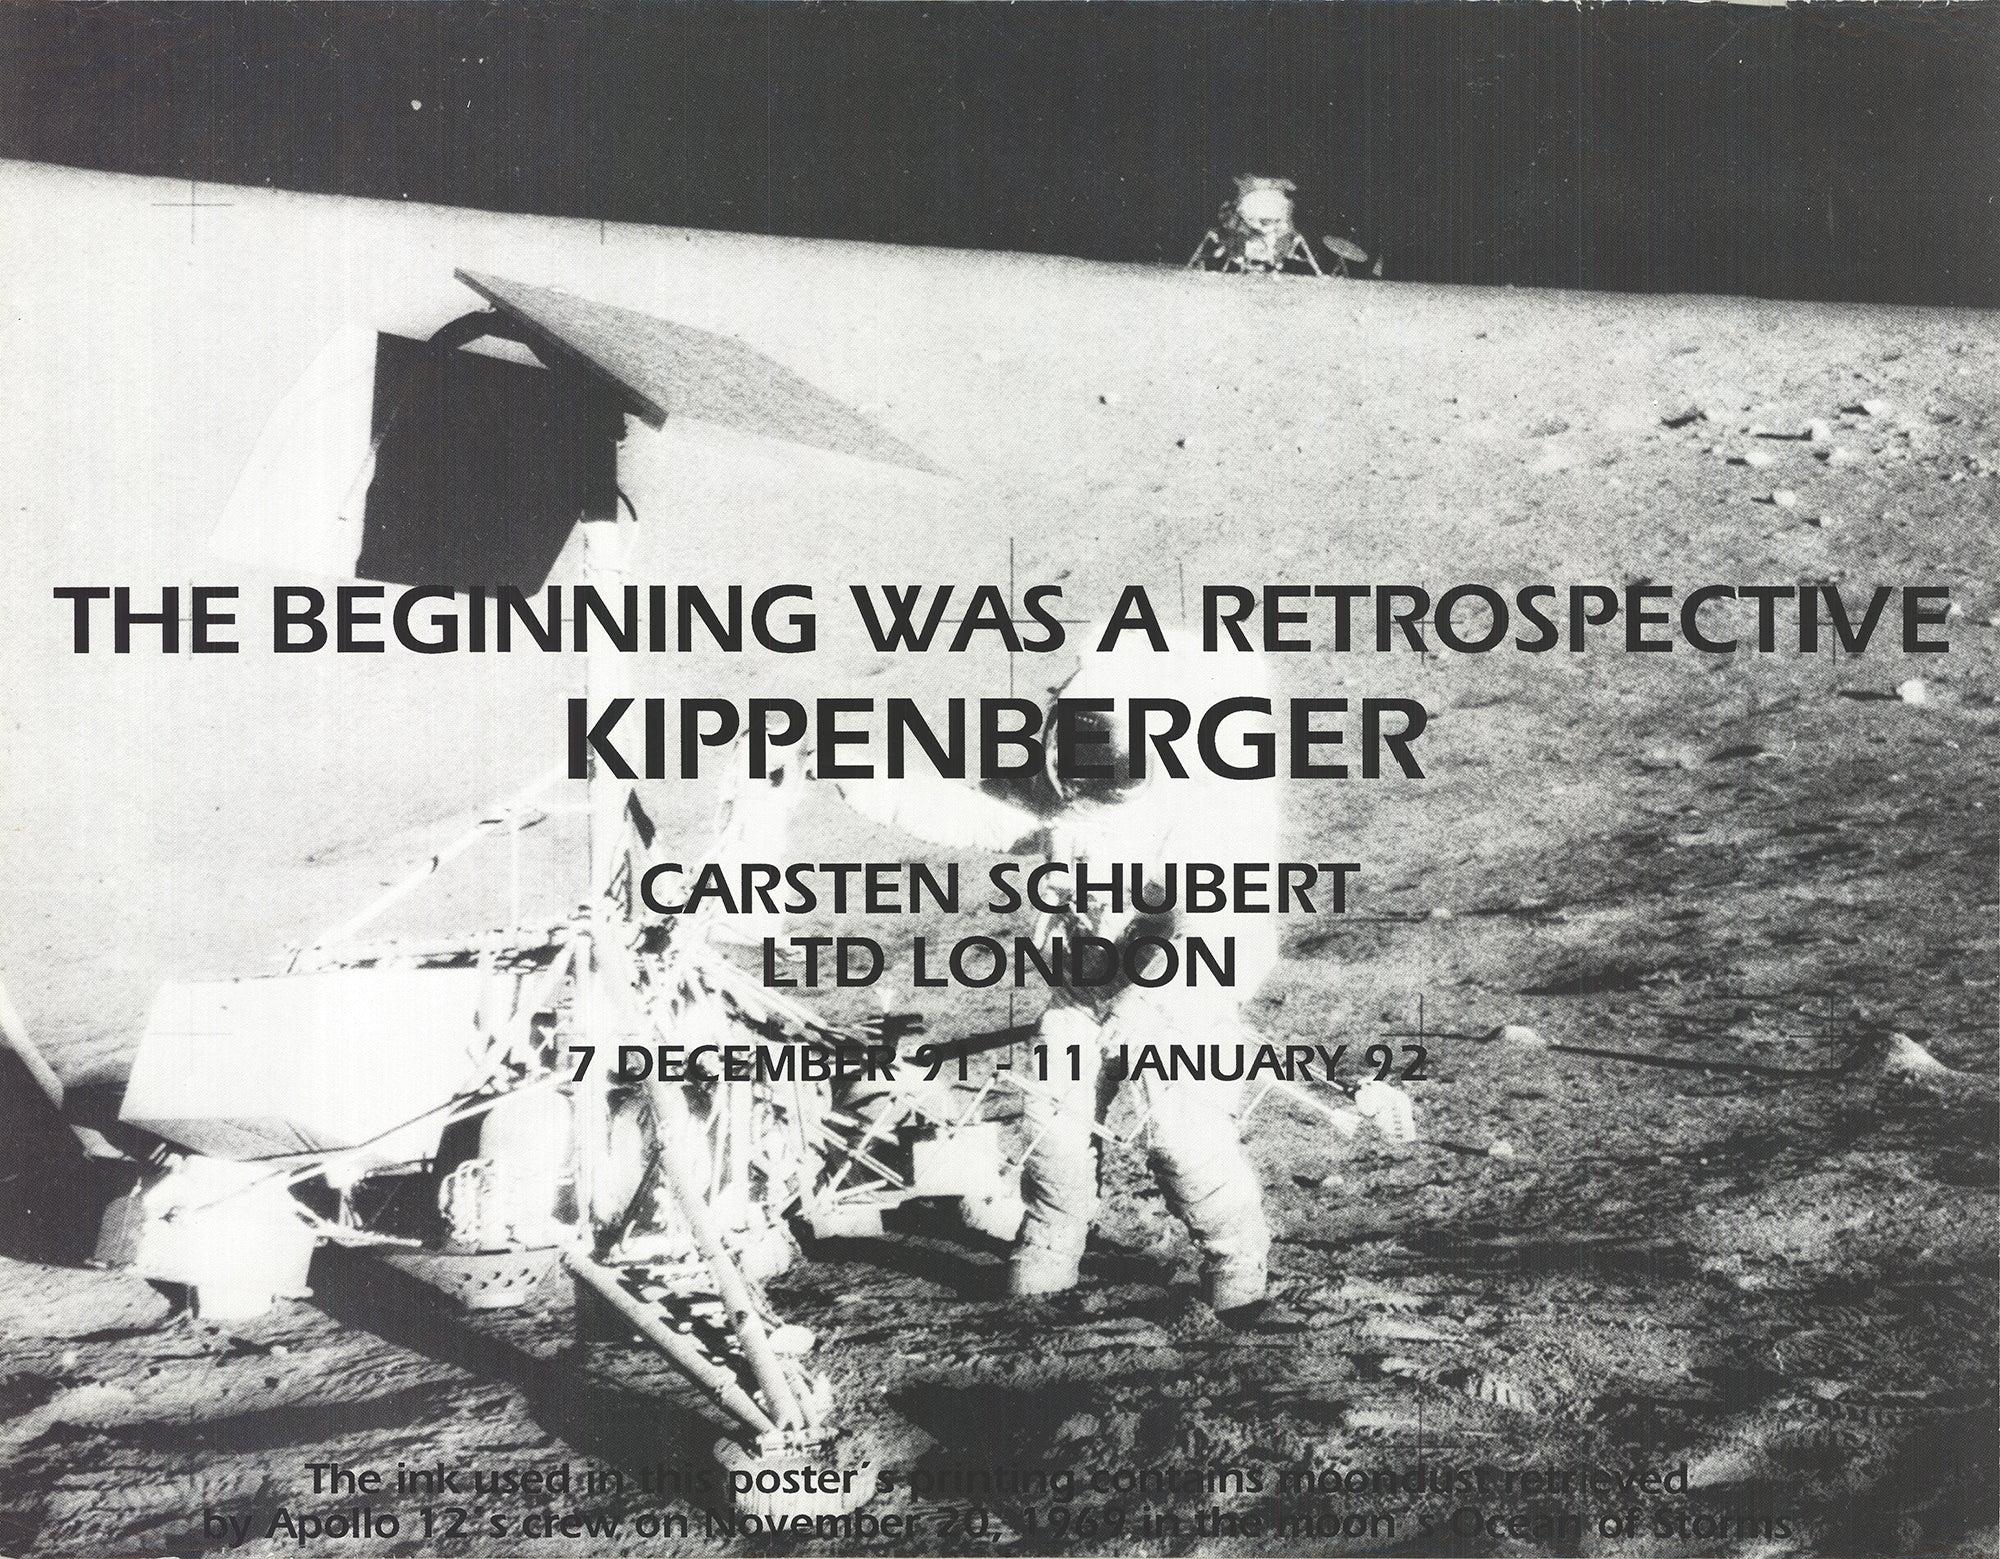 Sku: YY2970-B
Artist: Martin Kippenberger
Title: The Beginning was a Retrospective
Year: 1992
Signed: Yes
Medium: Offset Lithograph
Paper Size: 26.75 x 34.5 inches ( 67.945 x 87.63 cm )
Image Size: 26.75 x 34.5 inches ( 67.945 x 87.63 cm )
Edition